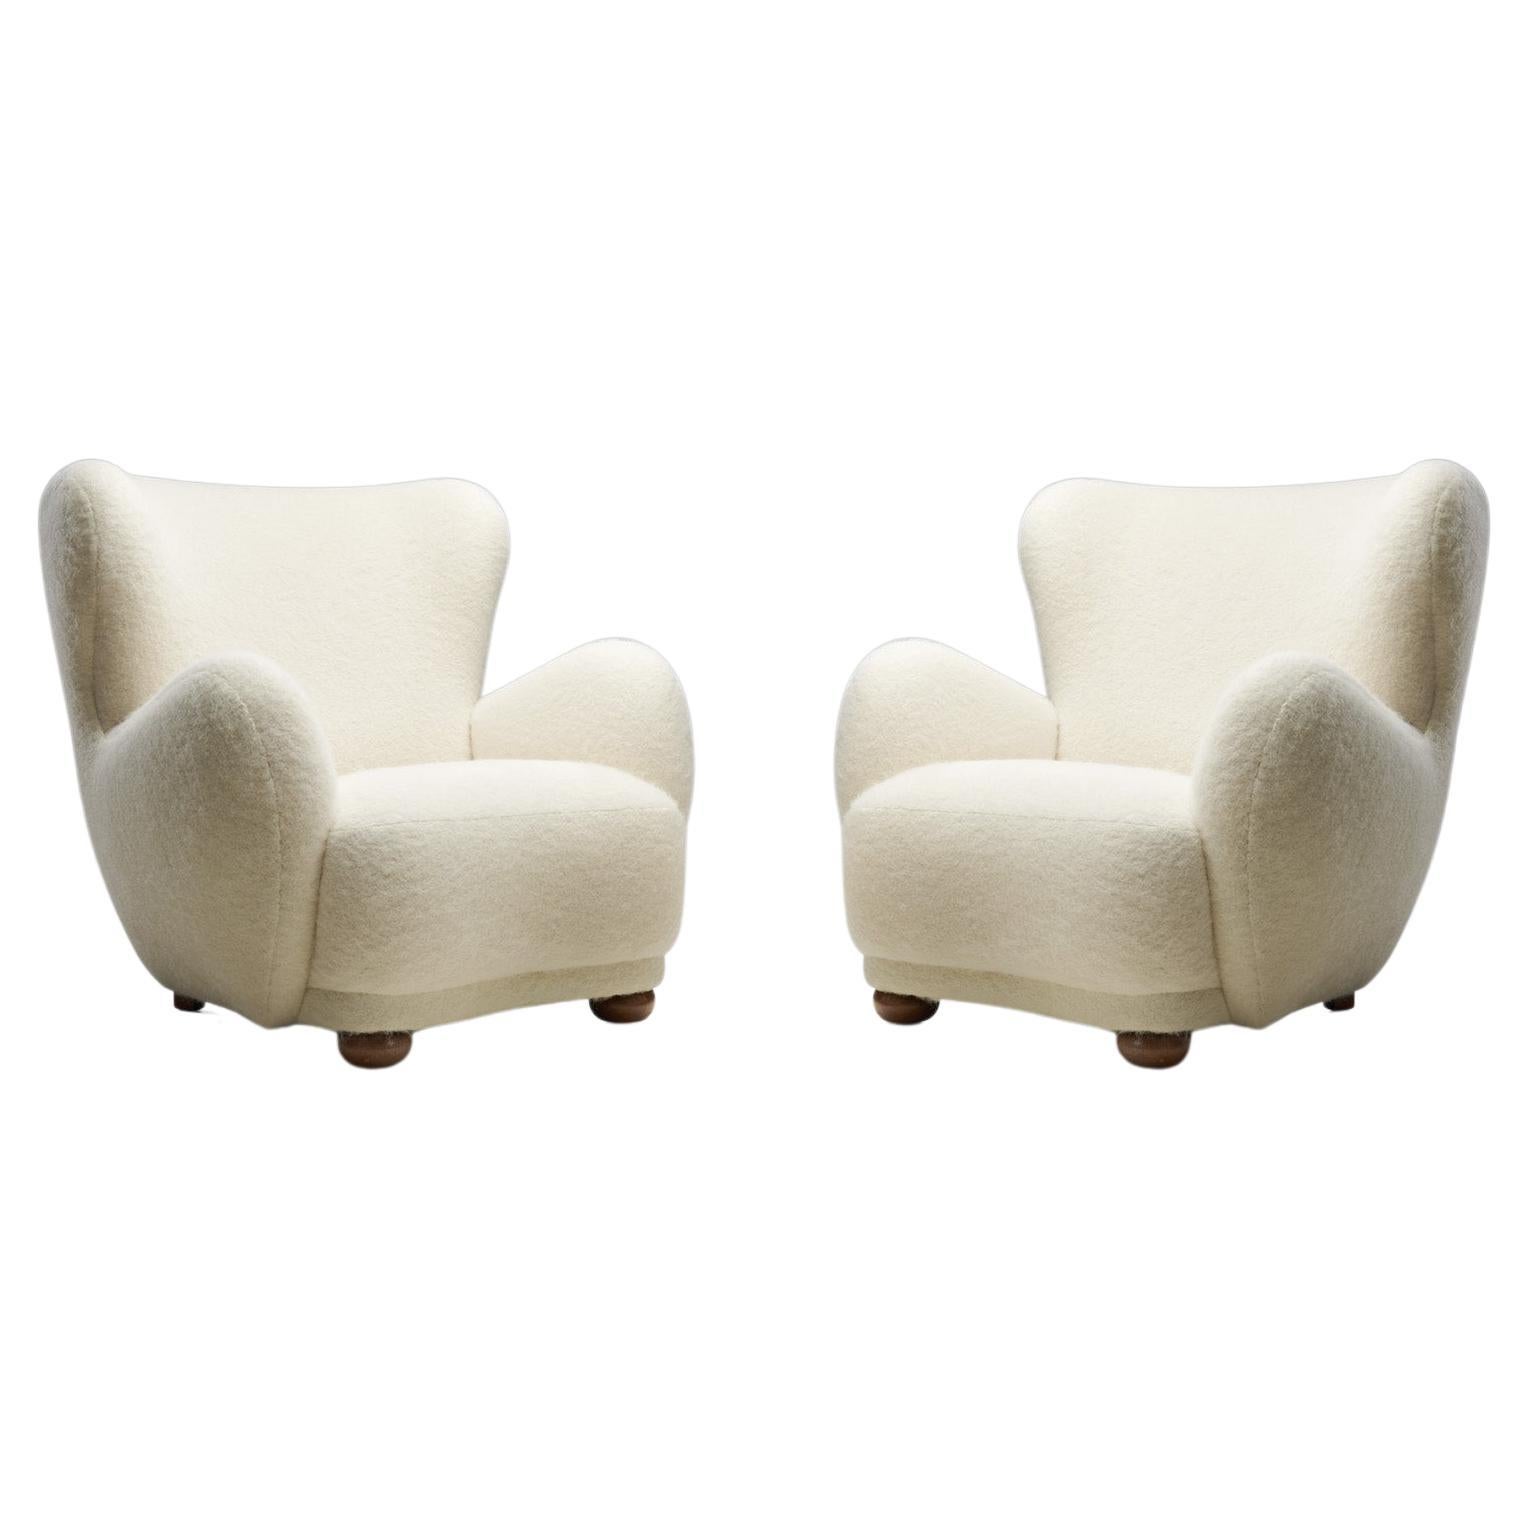 Order Alexis - Two Danish Cabinetmaker Armchairs Upholstered in Wool, Denmark